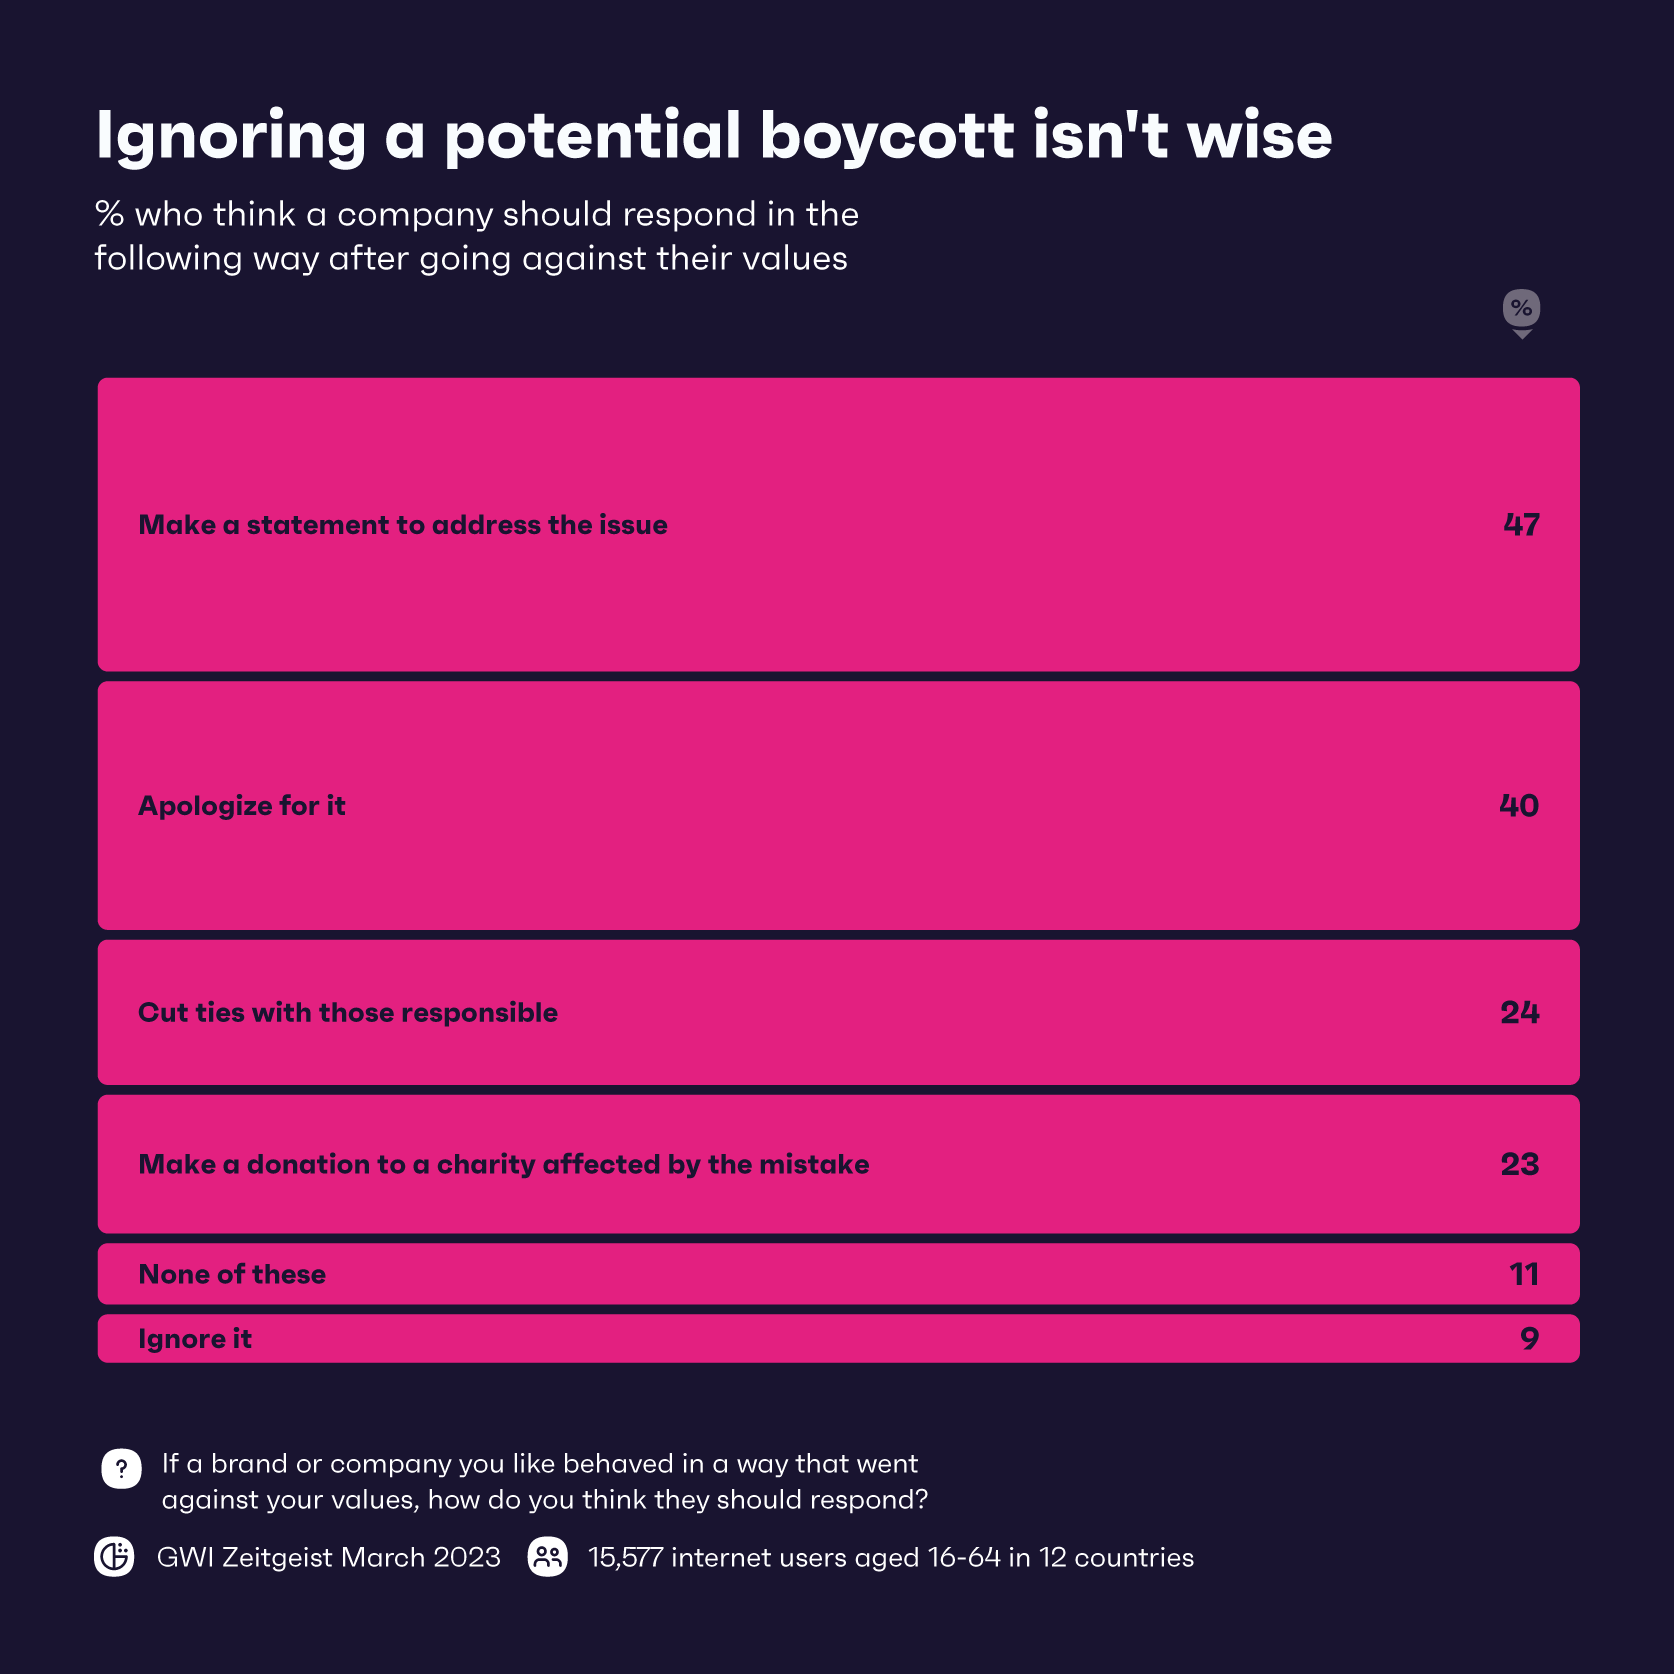 Chart showing how consumers think brands should respond to a potential boycott